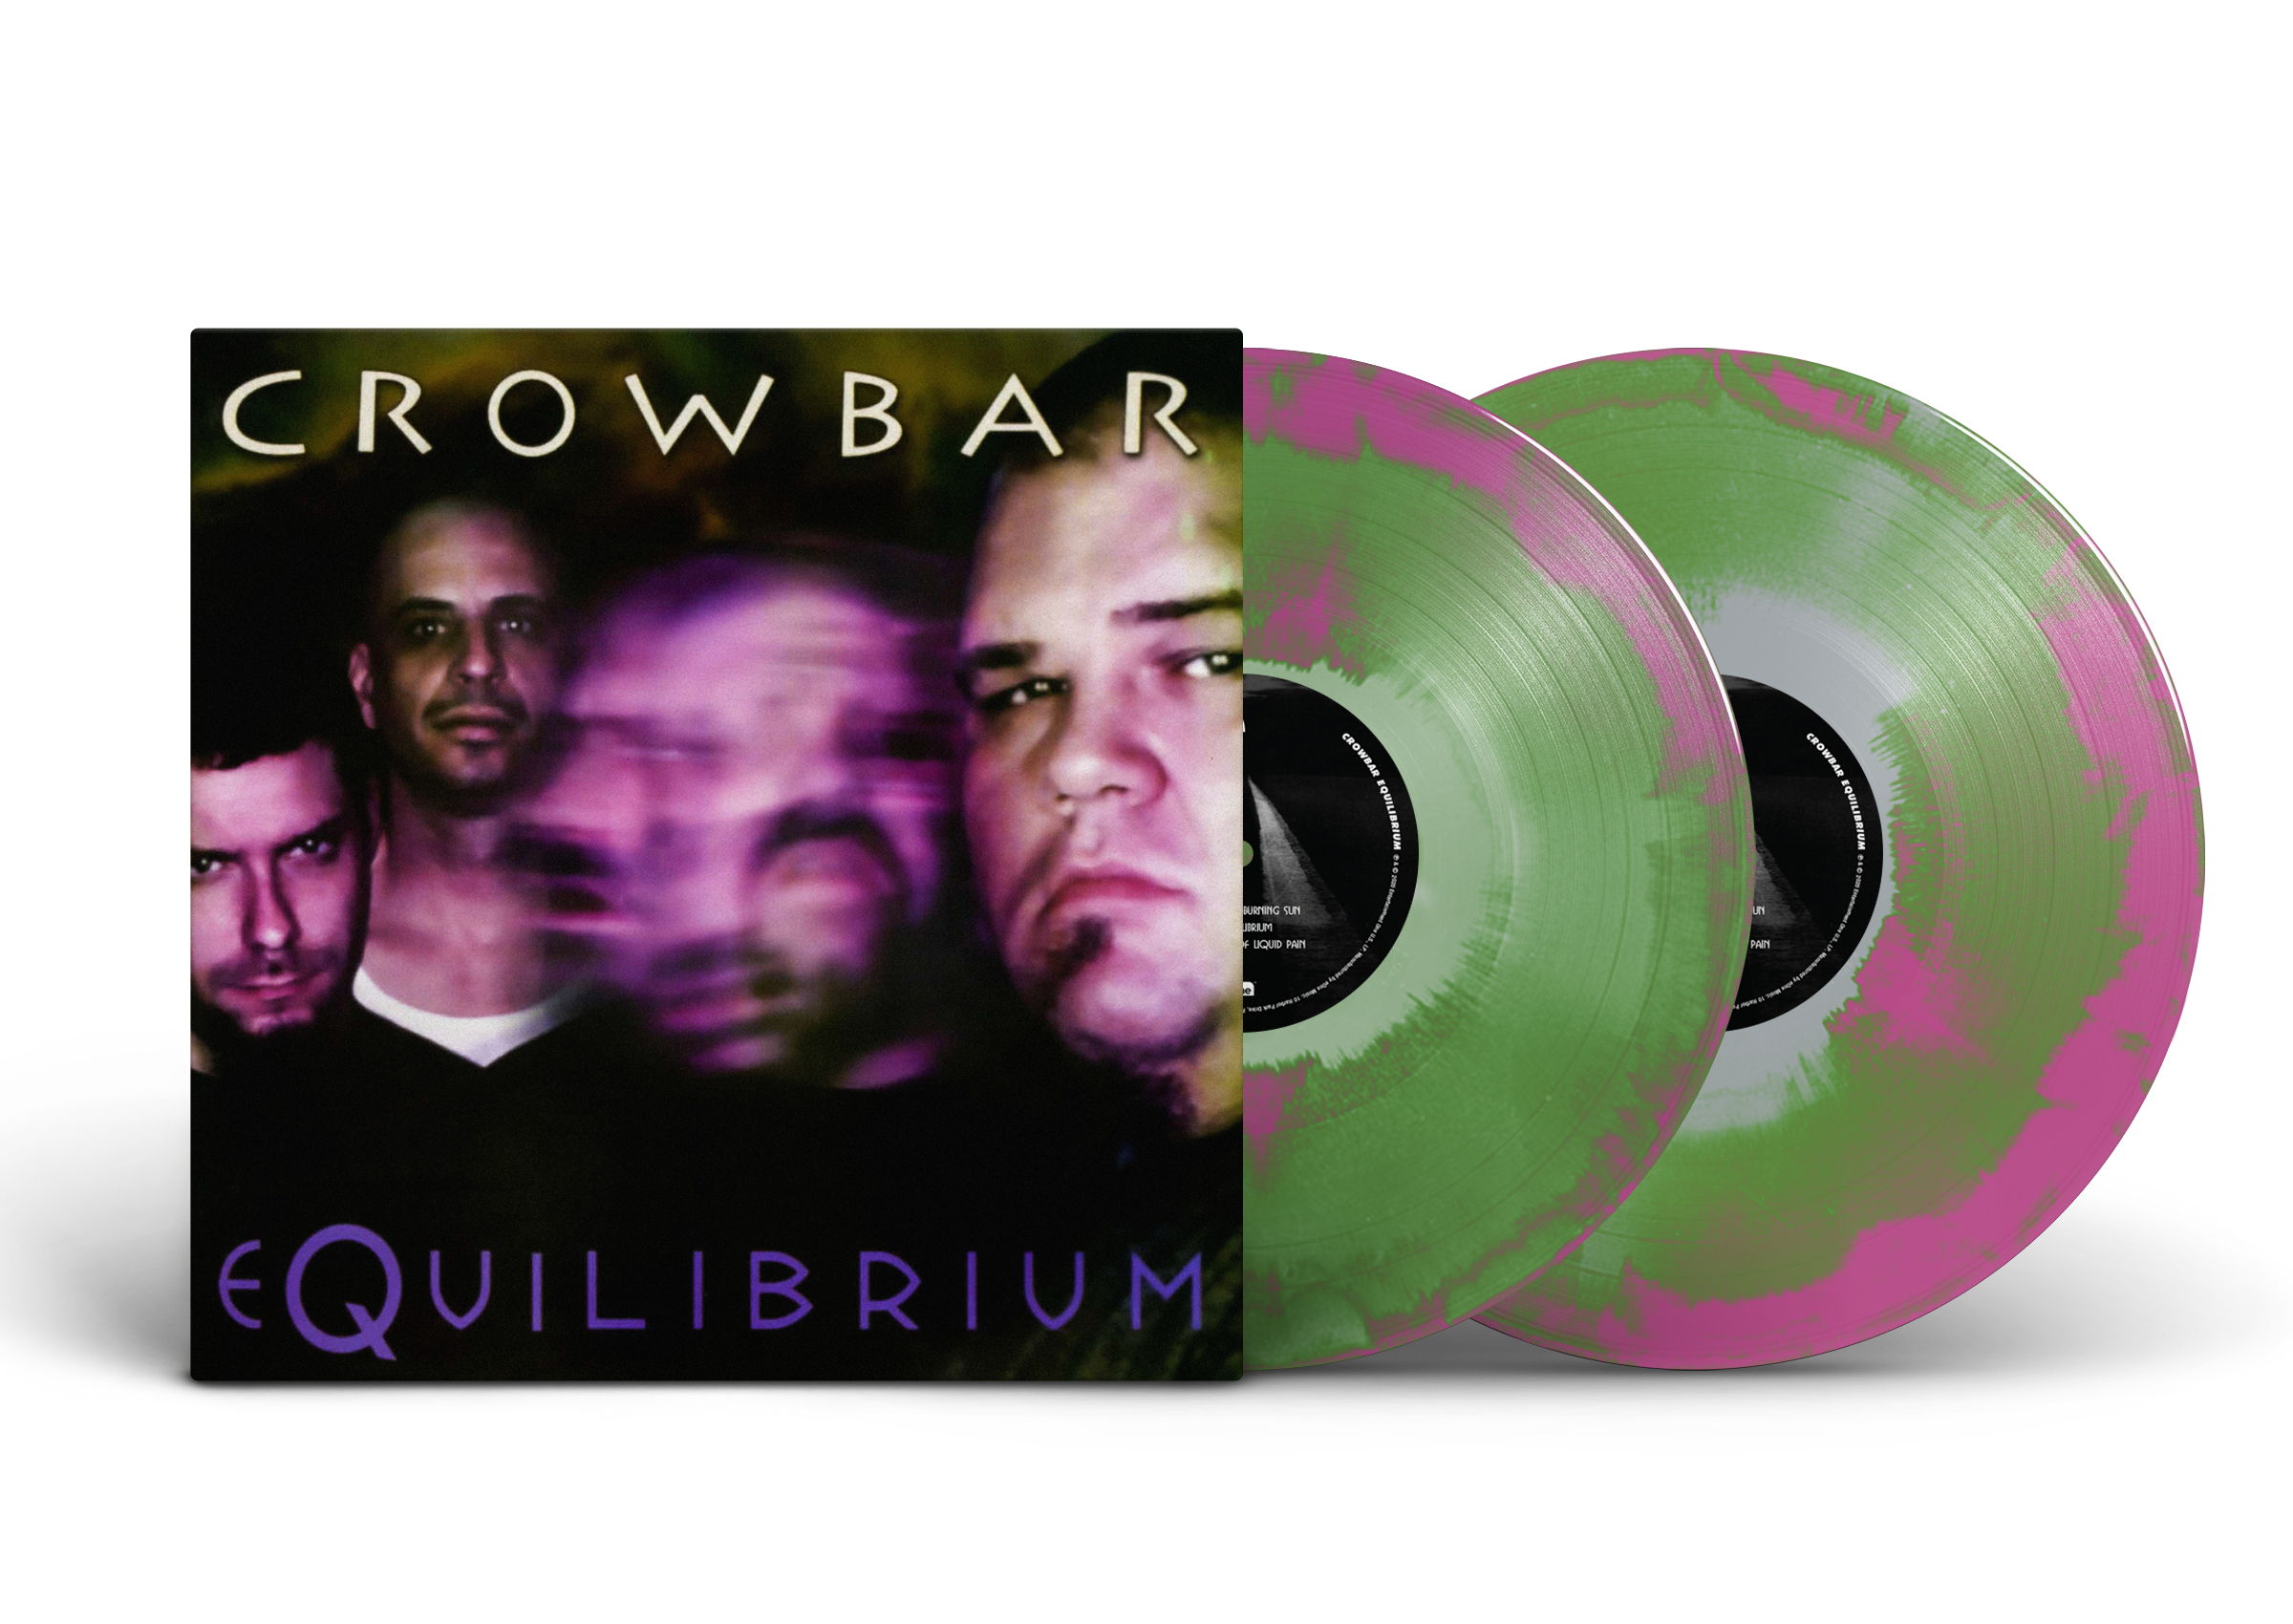 Crowbar - Equilibrium; VINYL; 2x 180Gramm ASide/BSide: Opaque Violet, Opaque Olive Green, Opaque Silver LPs